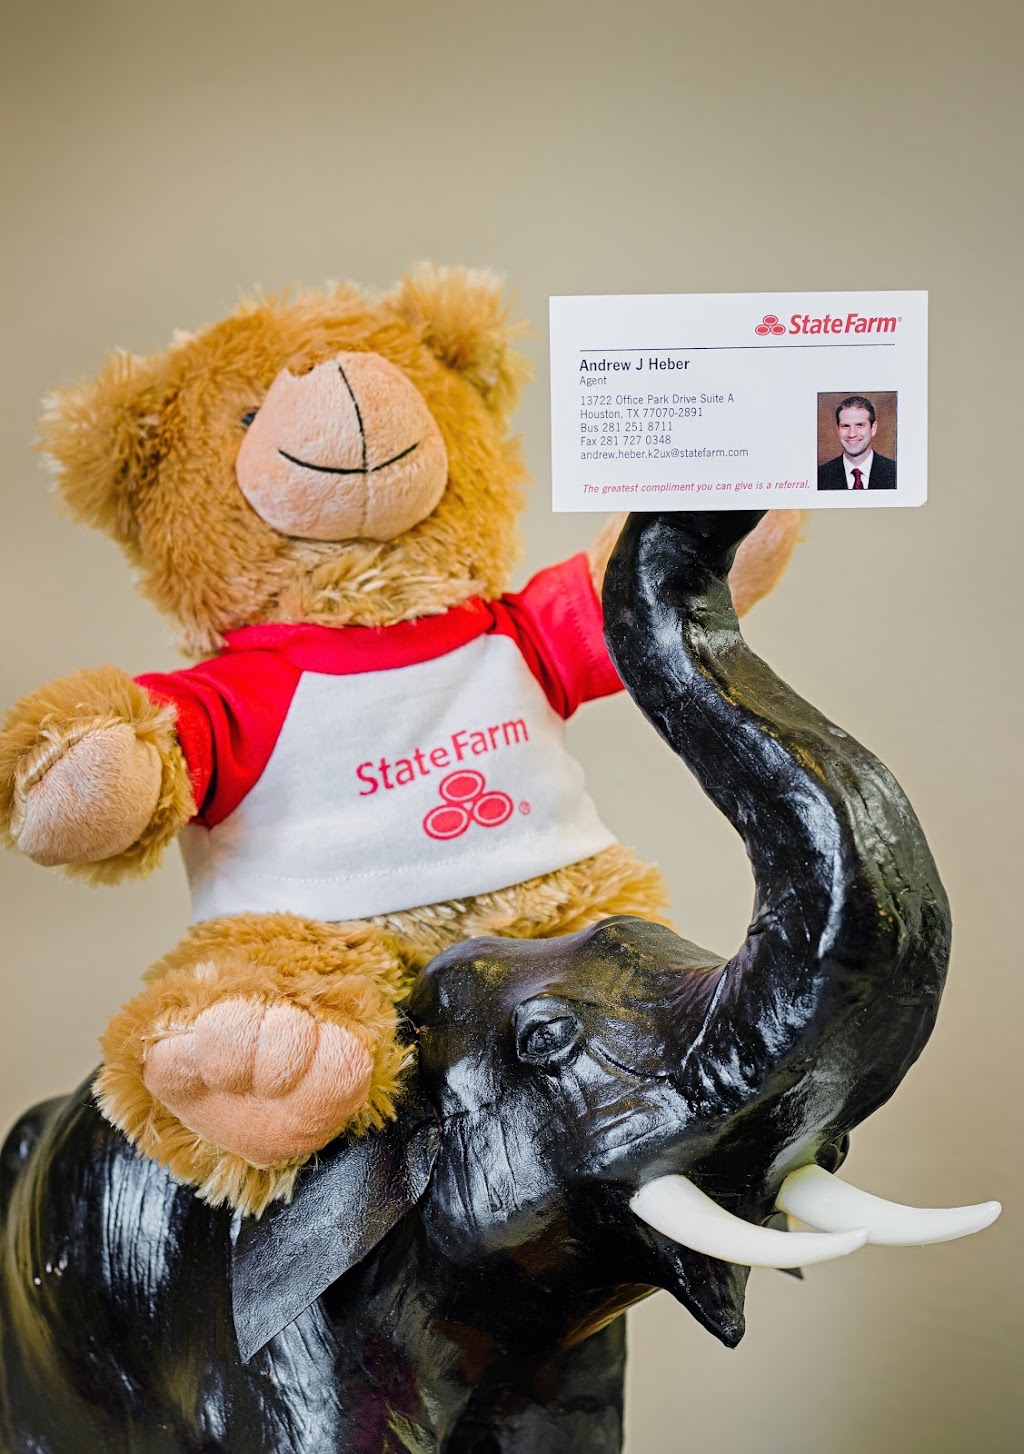 Andrew Heber - State Farm Insurance Agent | 13722 Office Park Dr A, Houston, TX 77070 | Phone: (281) 251-8711